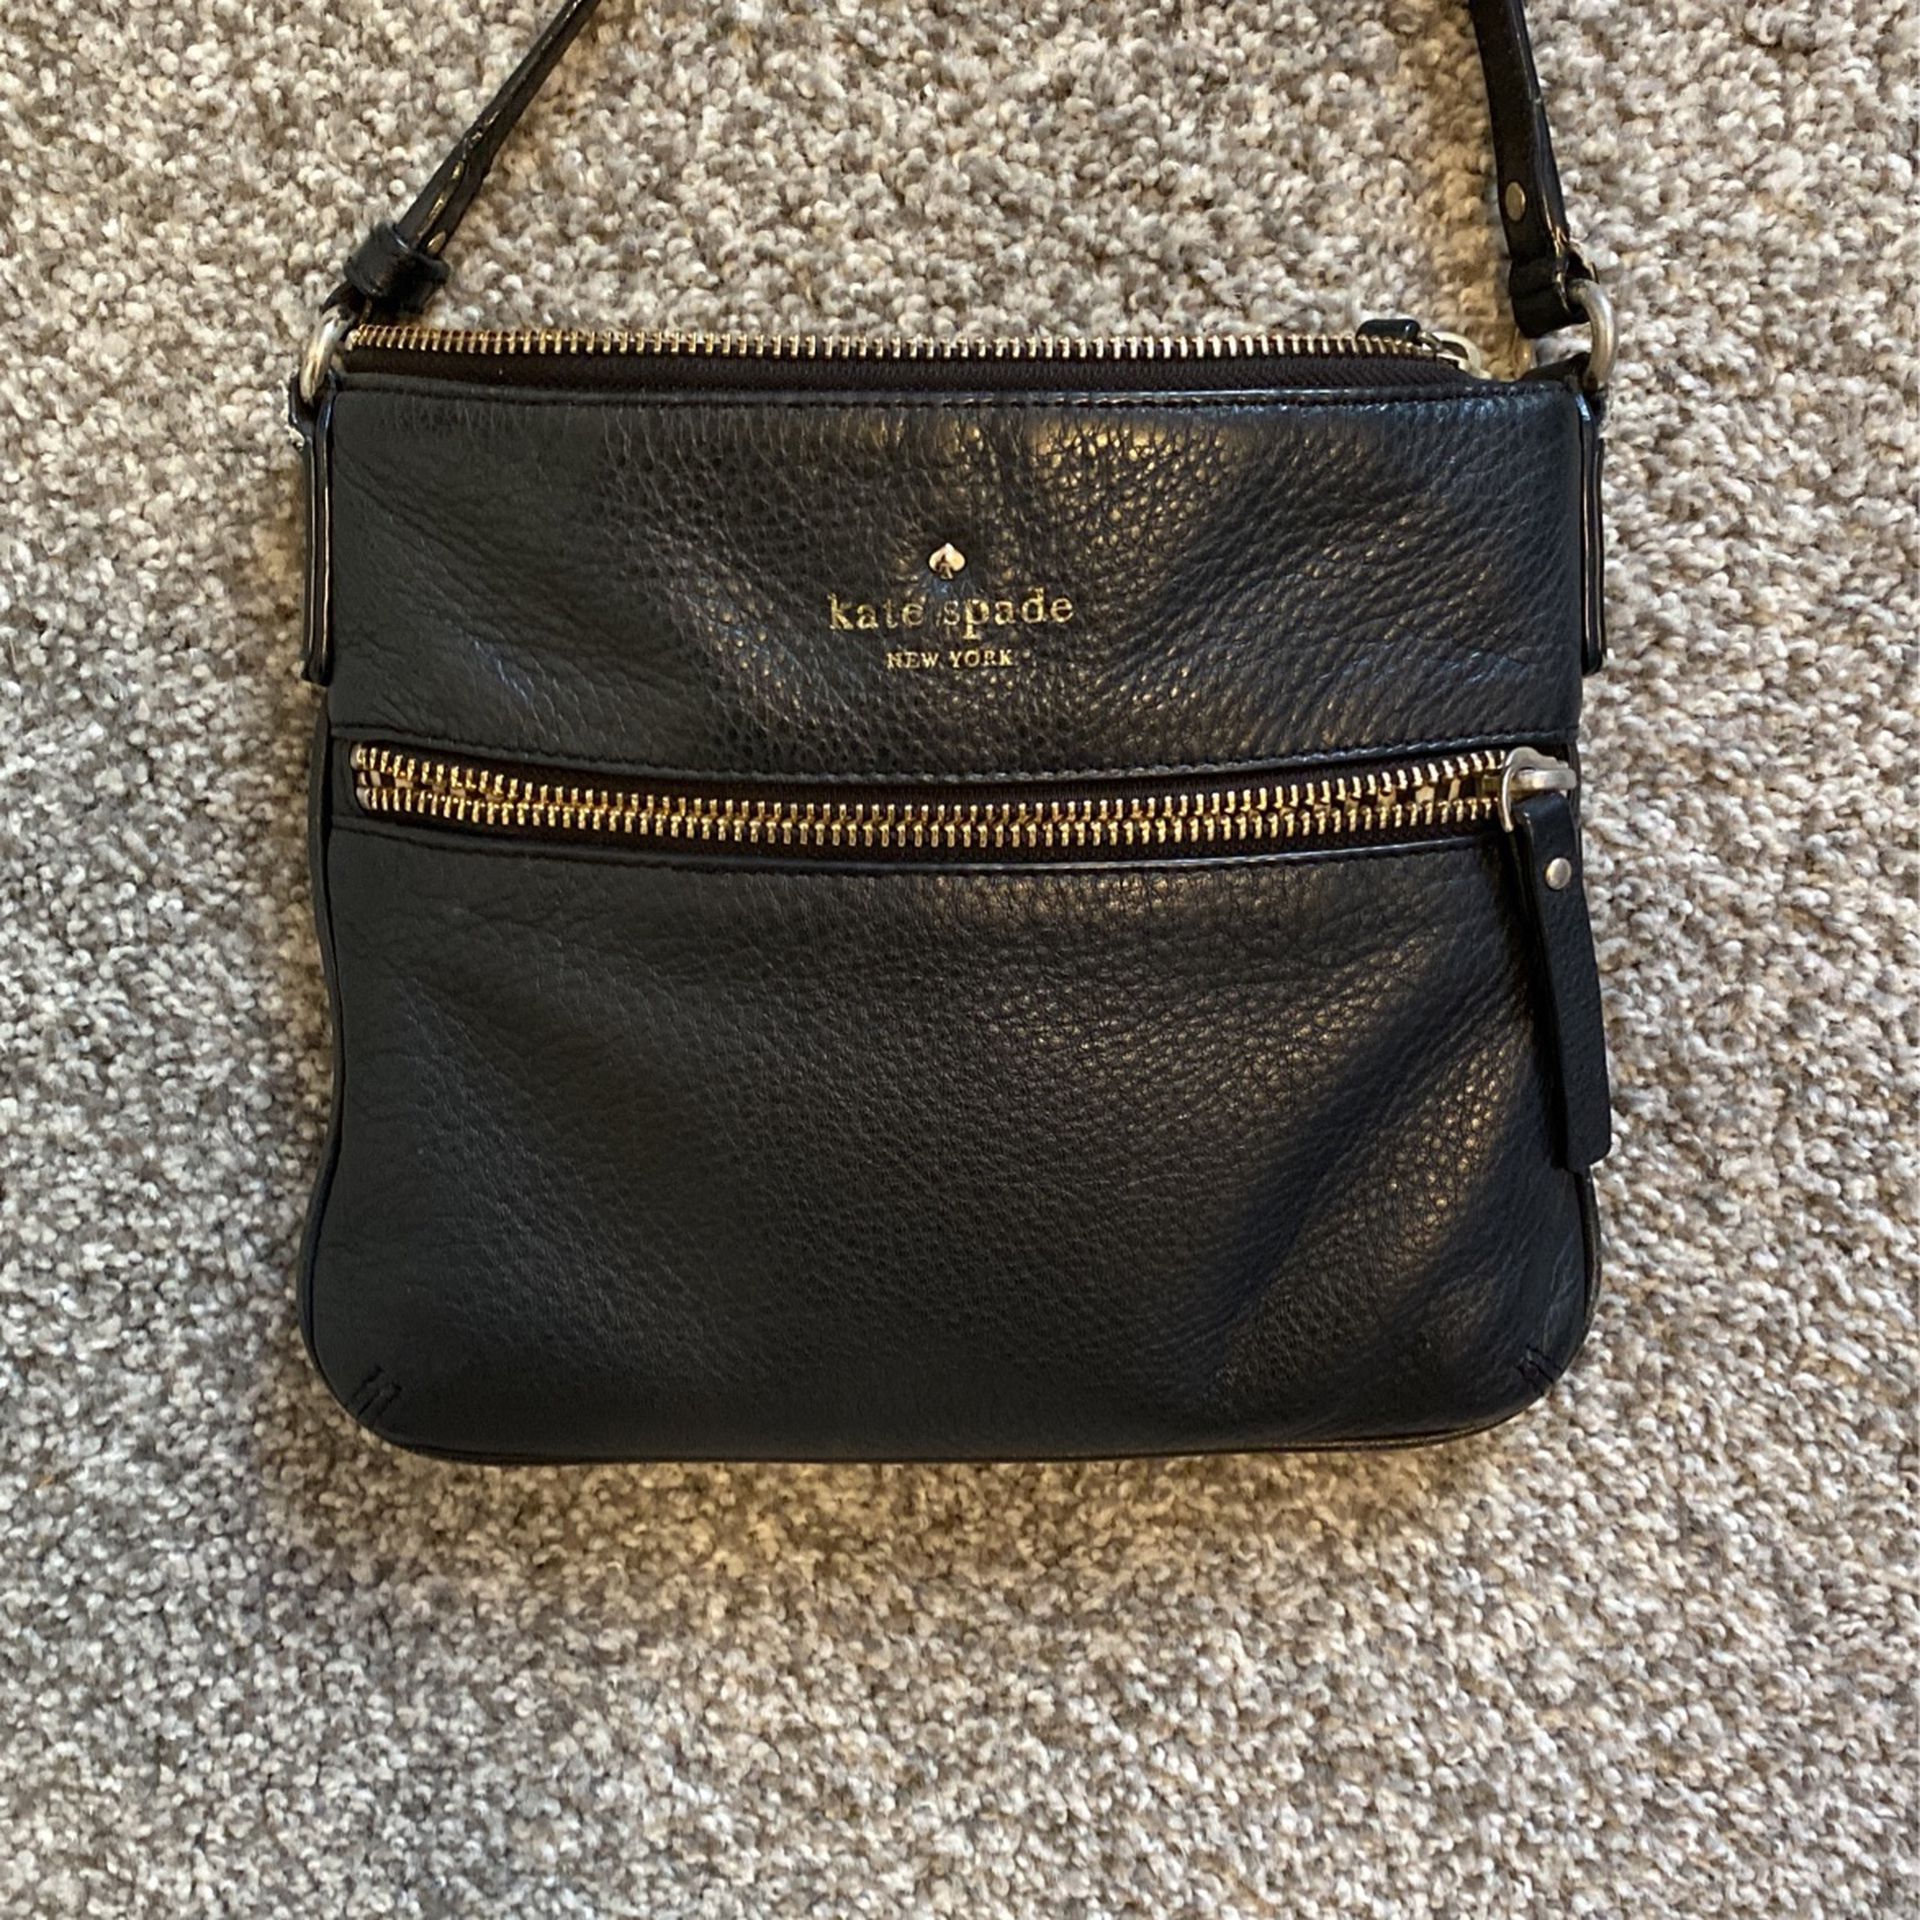 Small Kate Spade crossbody and Fossil wallet